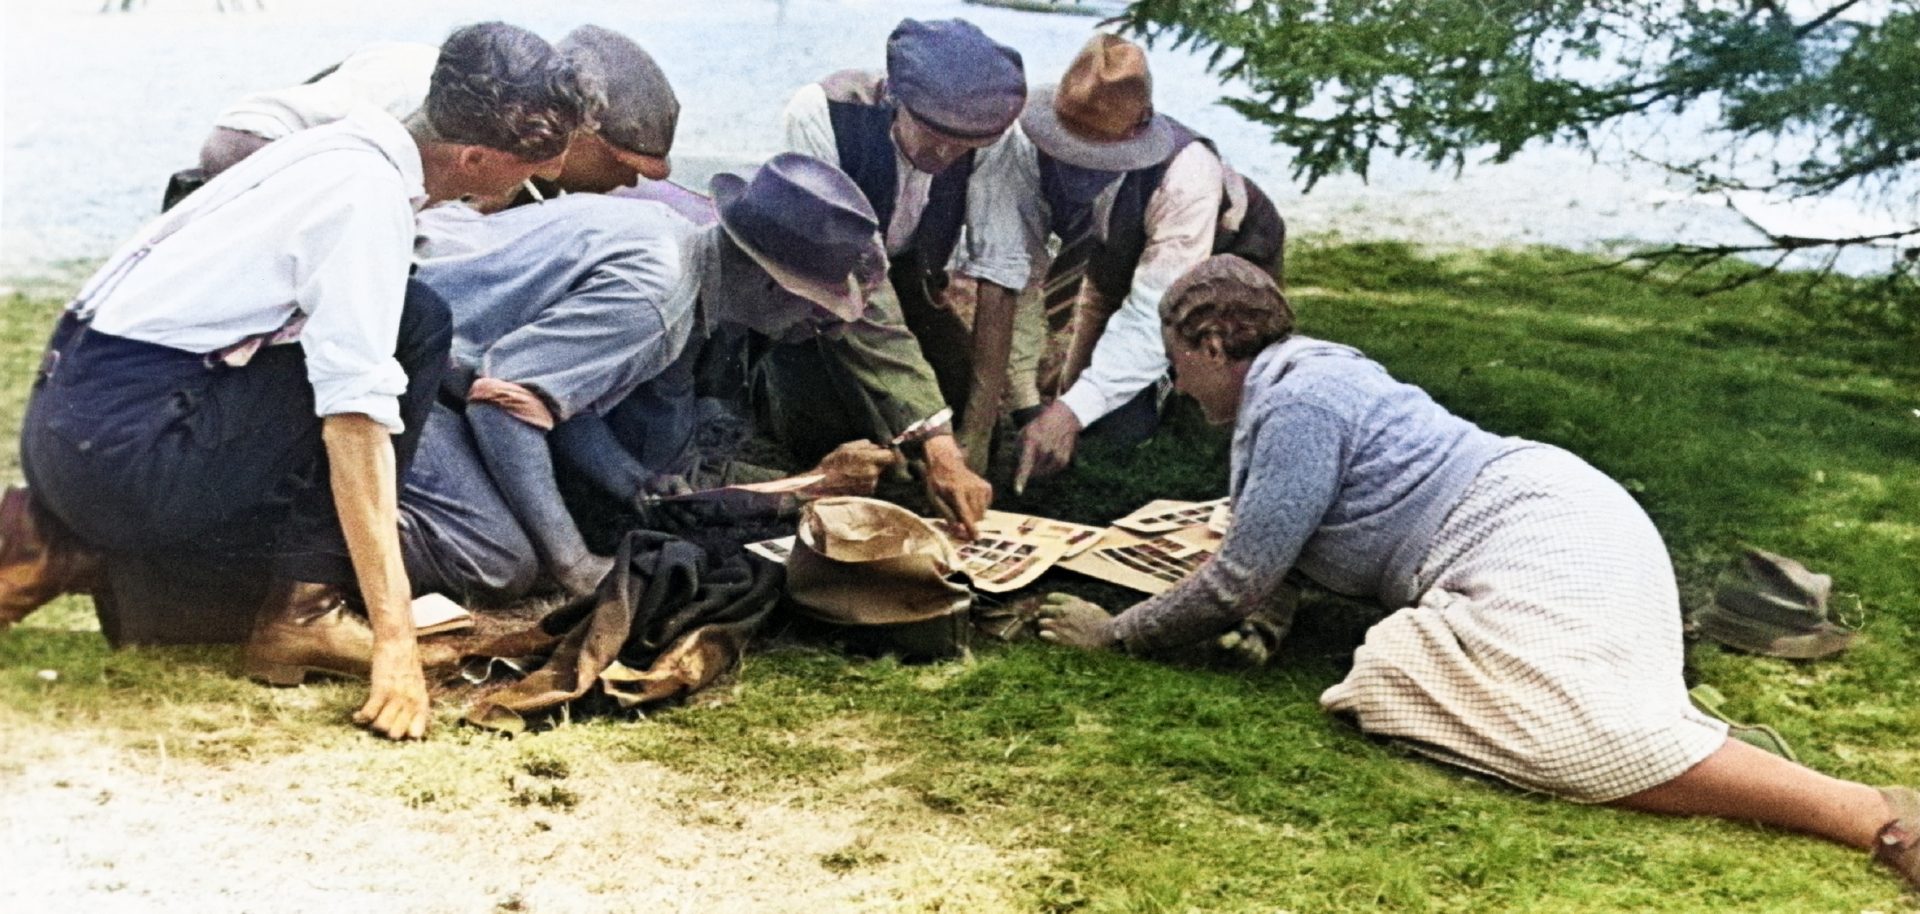 A group of people in old-fashioned clothing gathered around a stack of papers with photographs on a grassy area near Sutton Hoo.